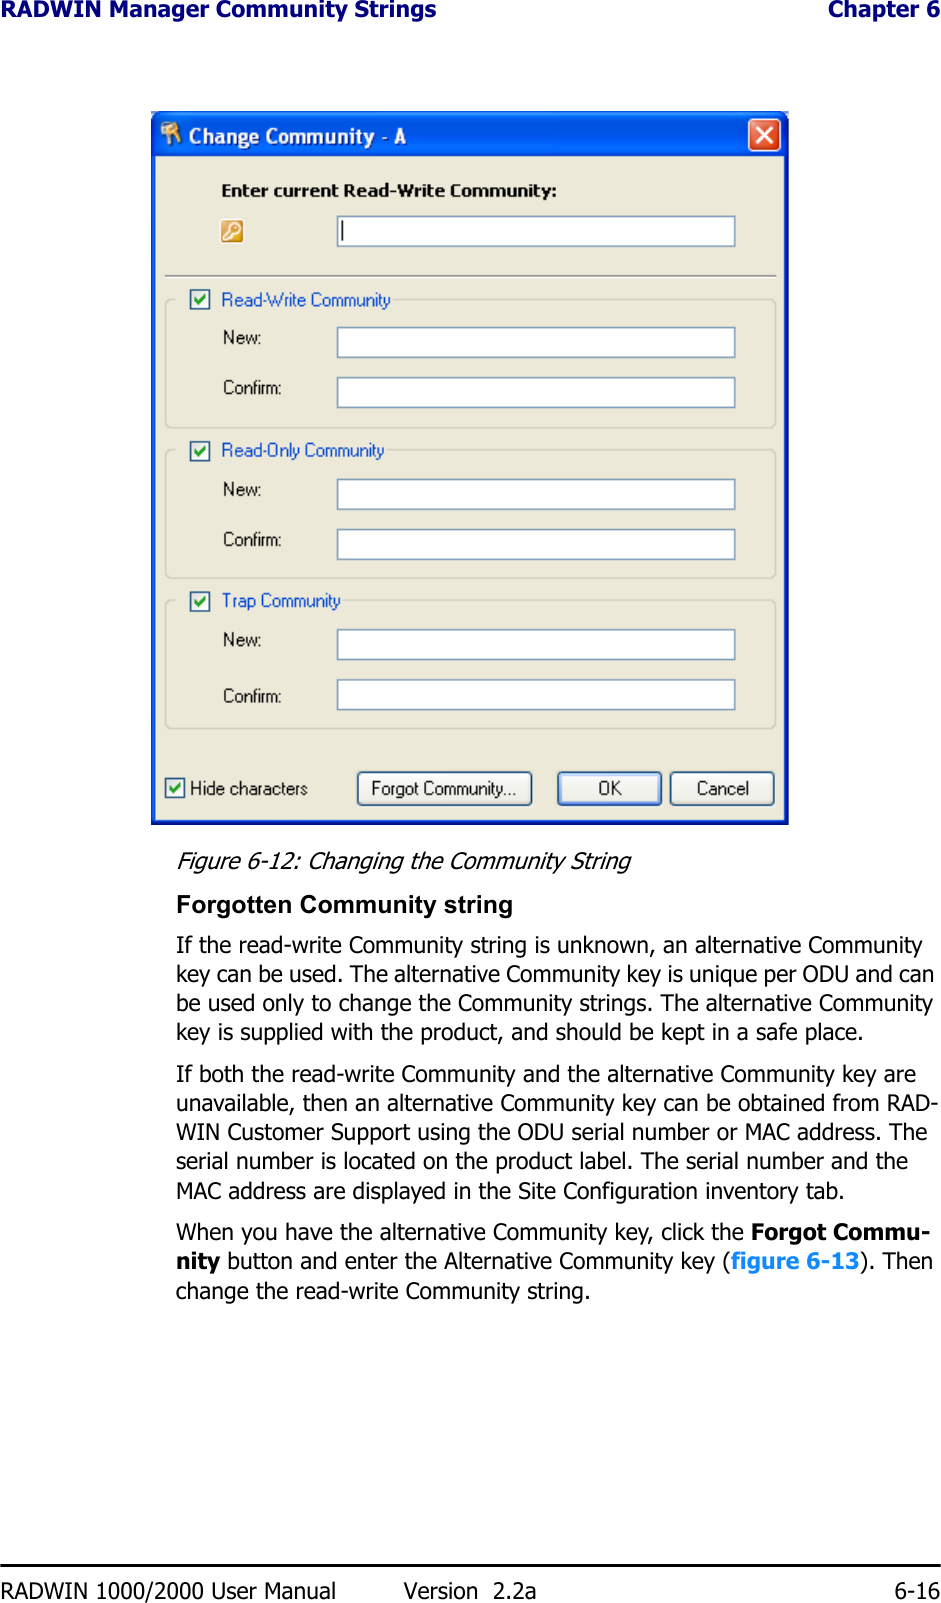 RADWIN Manager Community Strings  Chapter 6RADWIN 1000/2000 User Manual Version  2.2a 6-16Figure 6-12: Changing the Community StringForgotten Community stringIf the read-write Community string is unknown, an alternative Community key can be used. The alternative Community key is unique per ODU and can be used only to change the Community strings. The alternative Community key is supplied with the product, and should be kept in a safe place. If both the read-write Community and the alternative Community key are unavailable, then an alternative Community key can be obtained from RAD-WIN Customer Support using the ODU serial number or MAC address. The serial number is located on the product label. The serial number and the MAC address are displayed in the Site Configuration inventory tab.When you have the alternative Community key, click the Forgot Commu-nity button and enter the Alternative Community key (figure 6-13). Then change the read-write Community string.